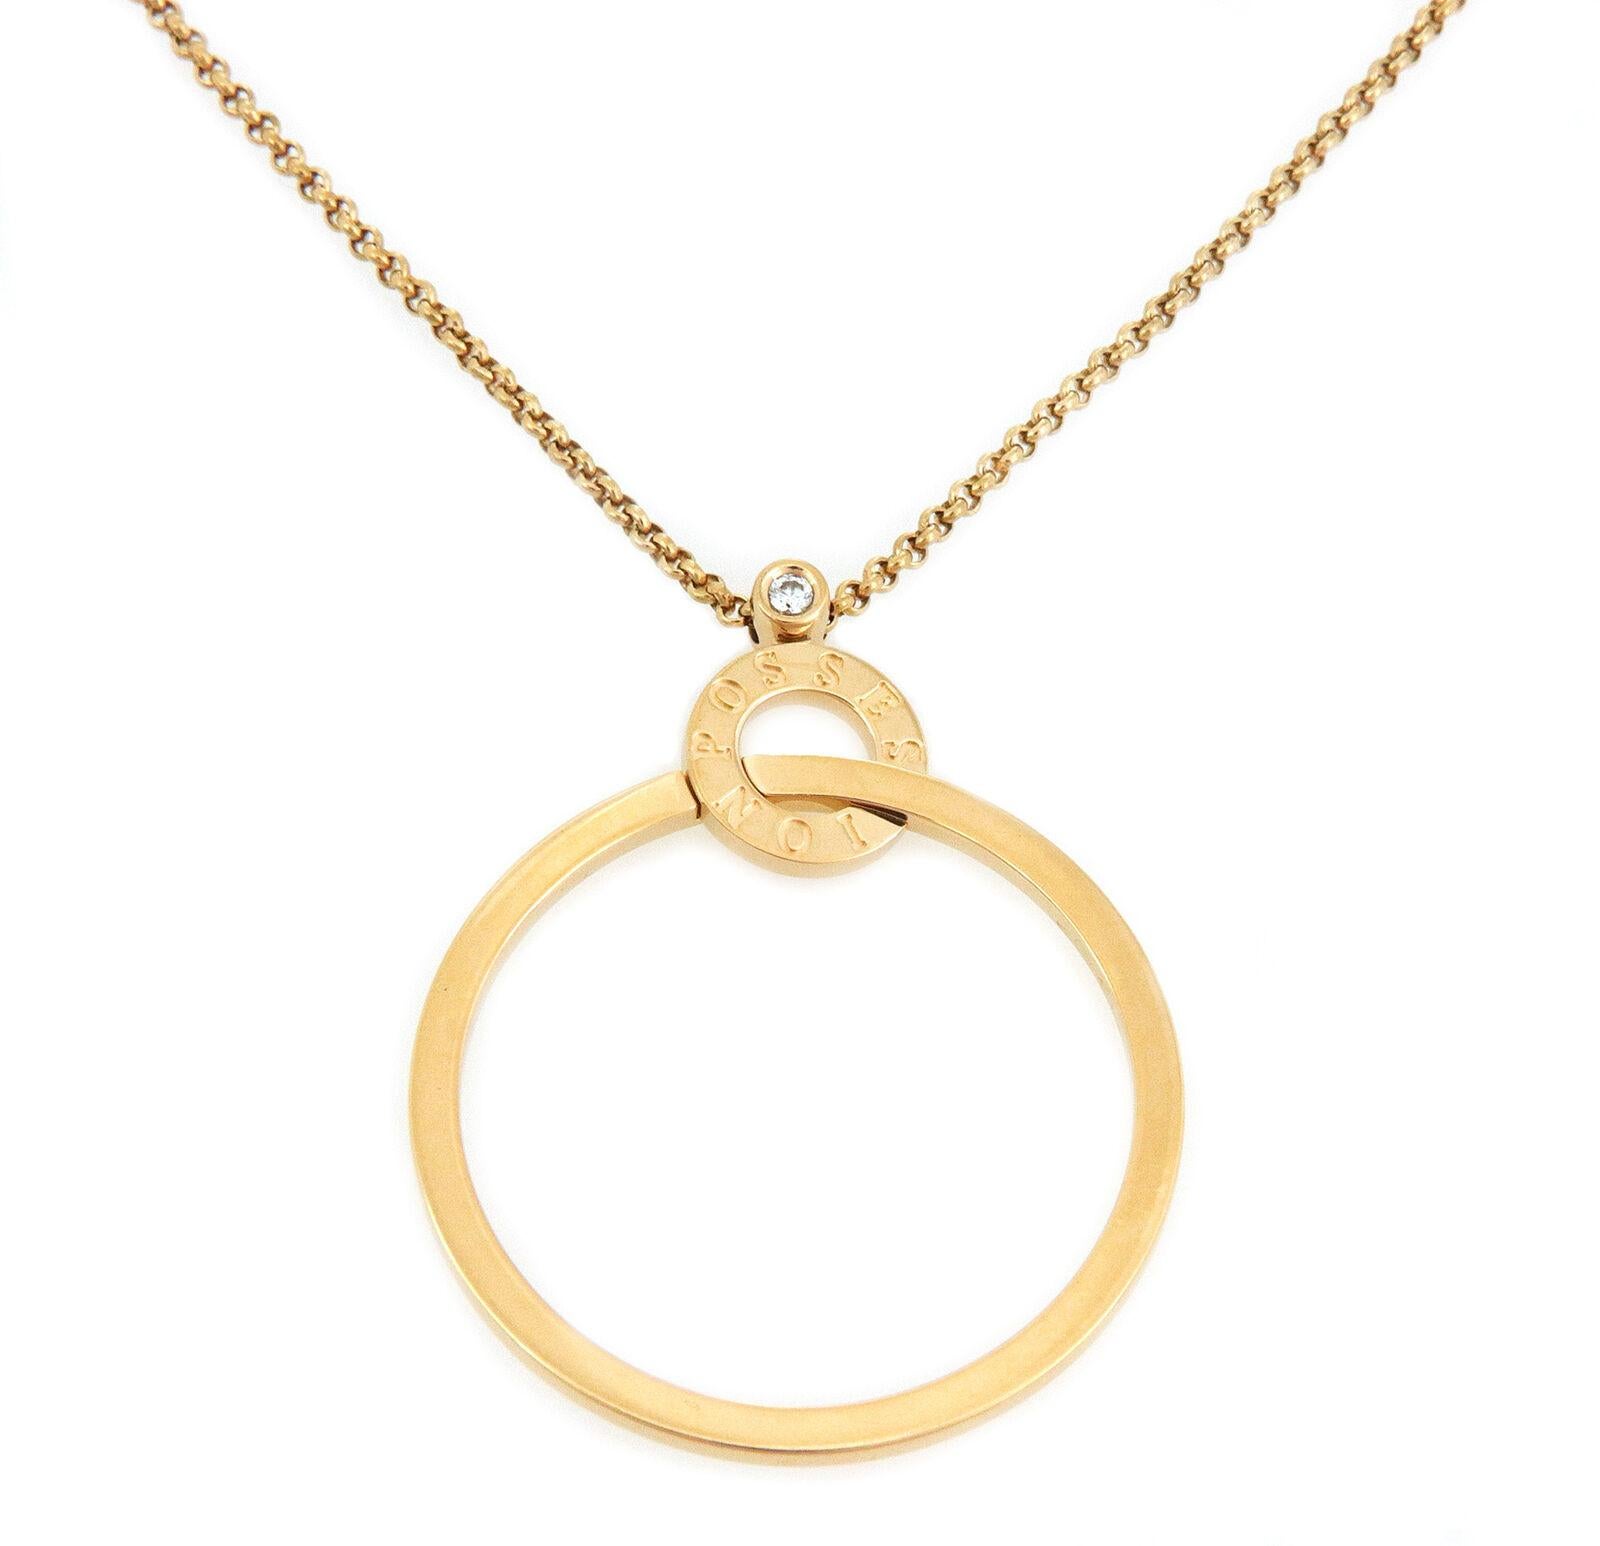 This chic authentic necklace is by Piaget from the Possession Collection. Crafted from 18k yellow gold with a high polished finish featuring a large open ring interlaced with a smaller ring above engraved Possession. The top of the pendant is